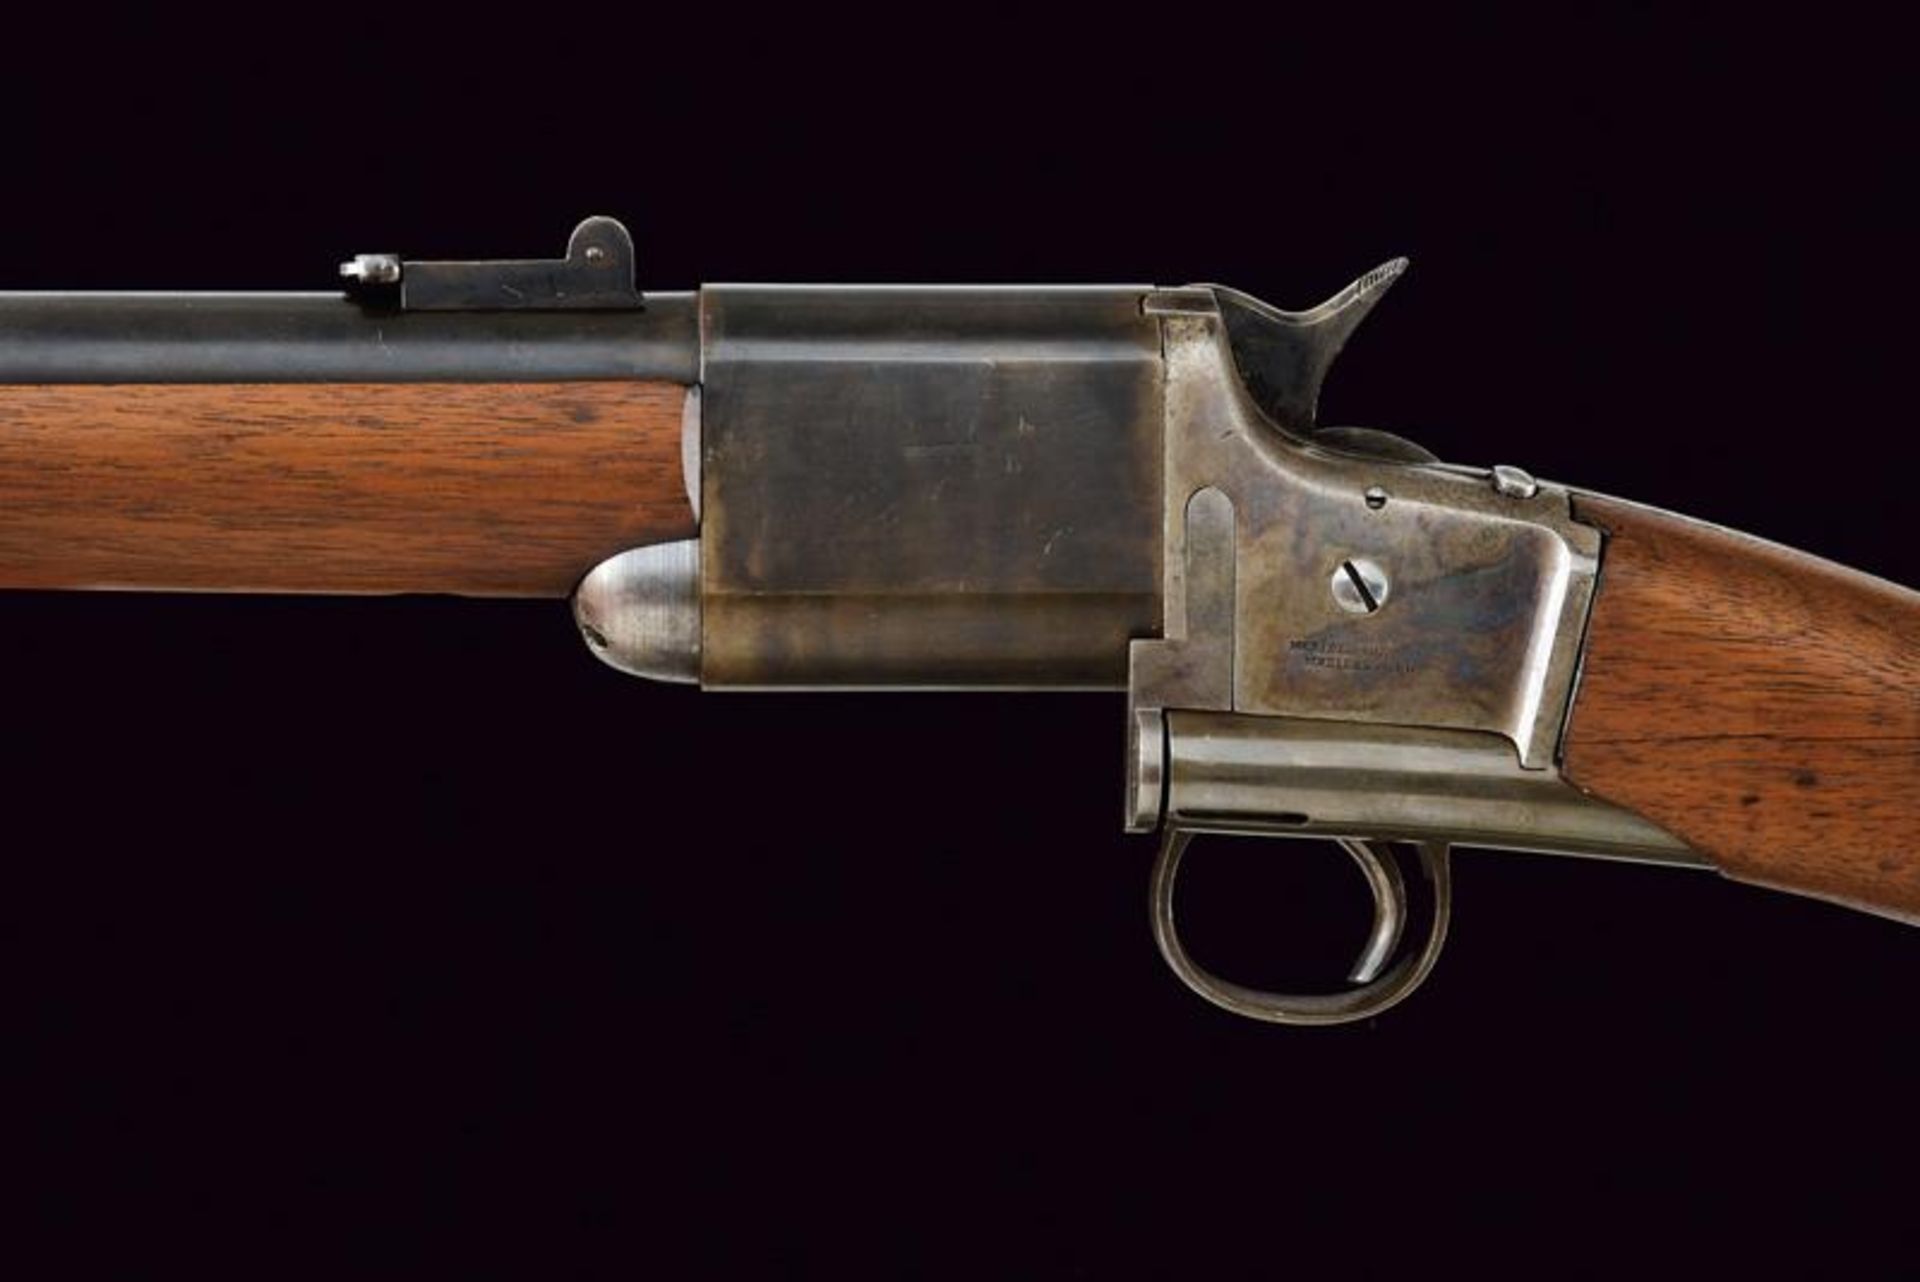 A rare Triplett & Scott Repeating Carbine by Meriden - Image 4 of 11